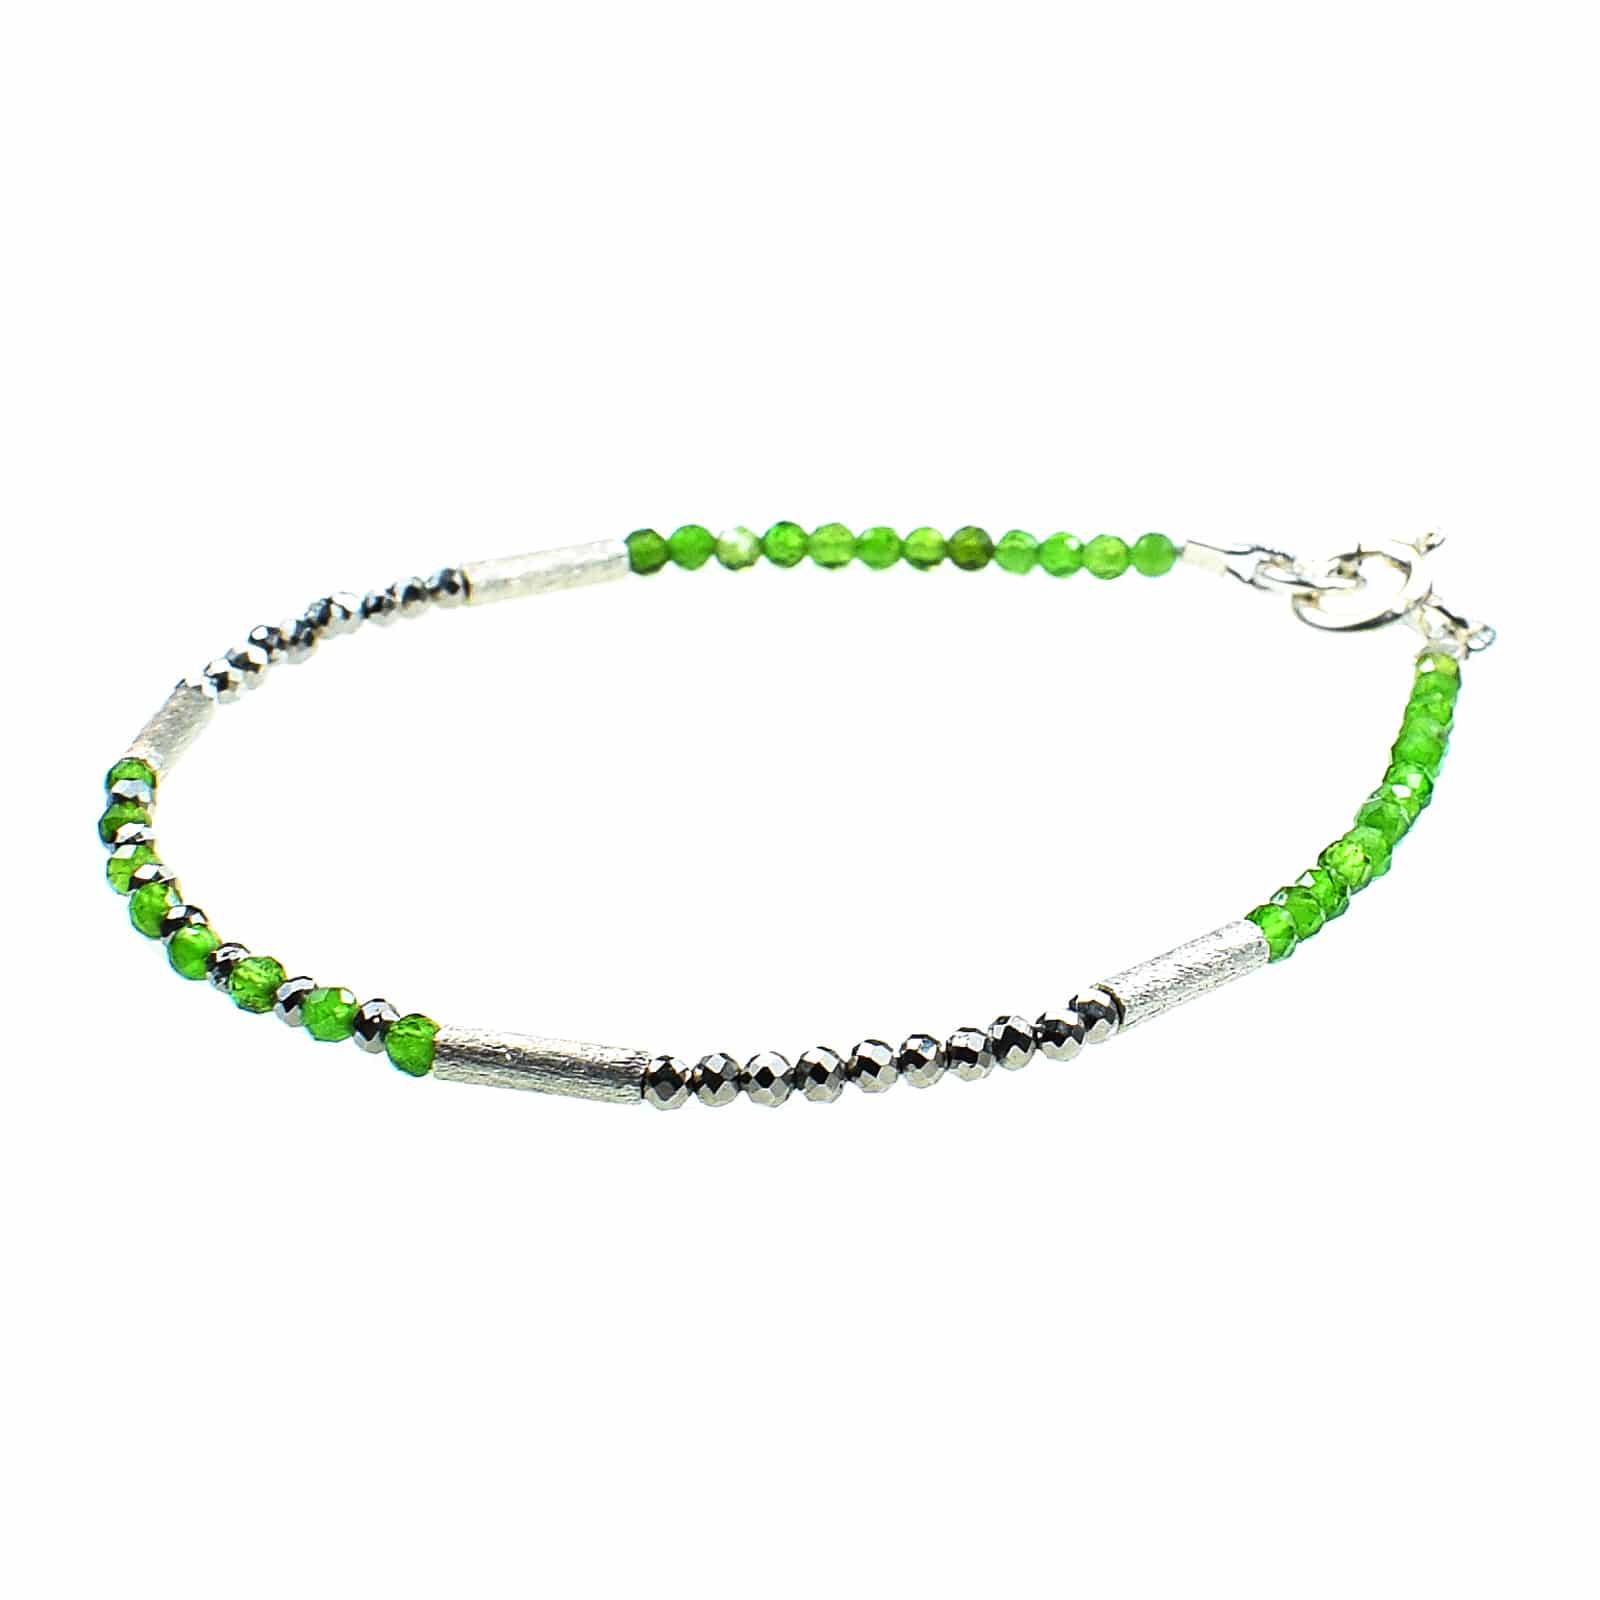 Bracelet made of Diopside and Pyrite